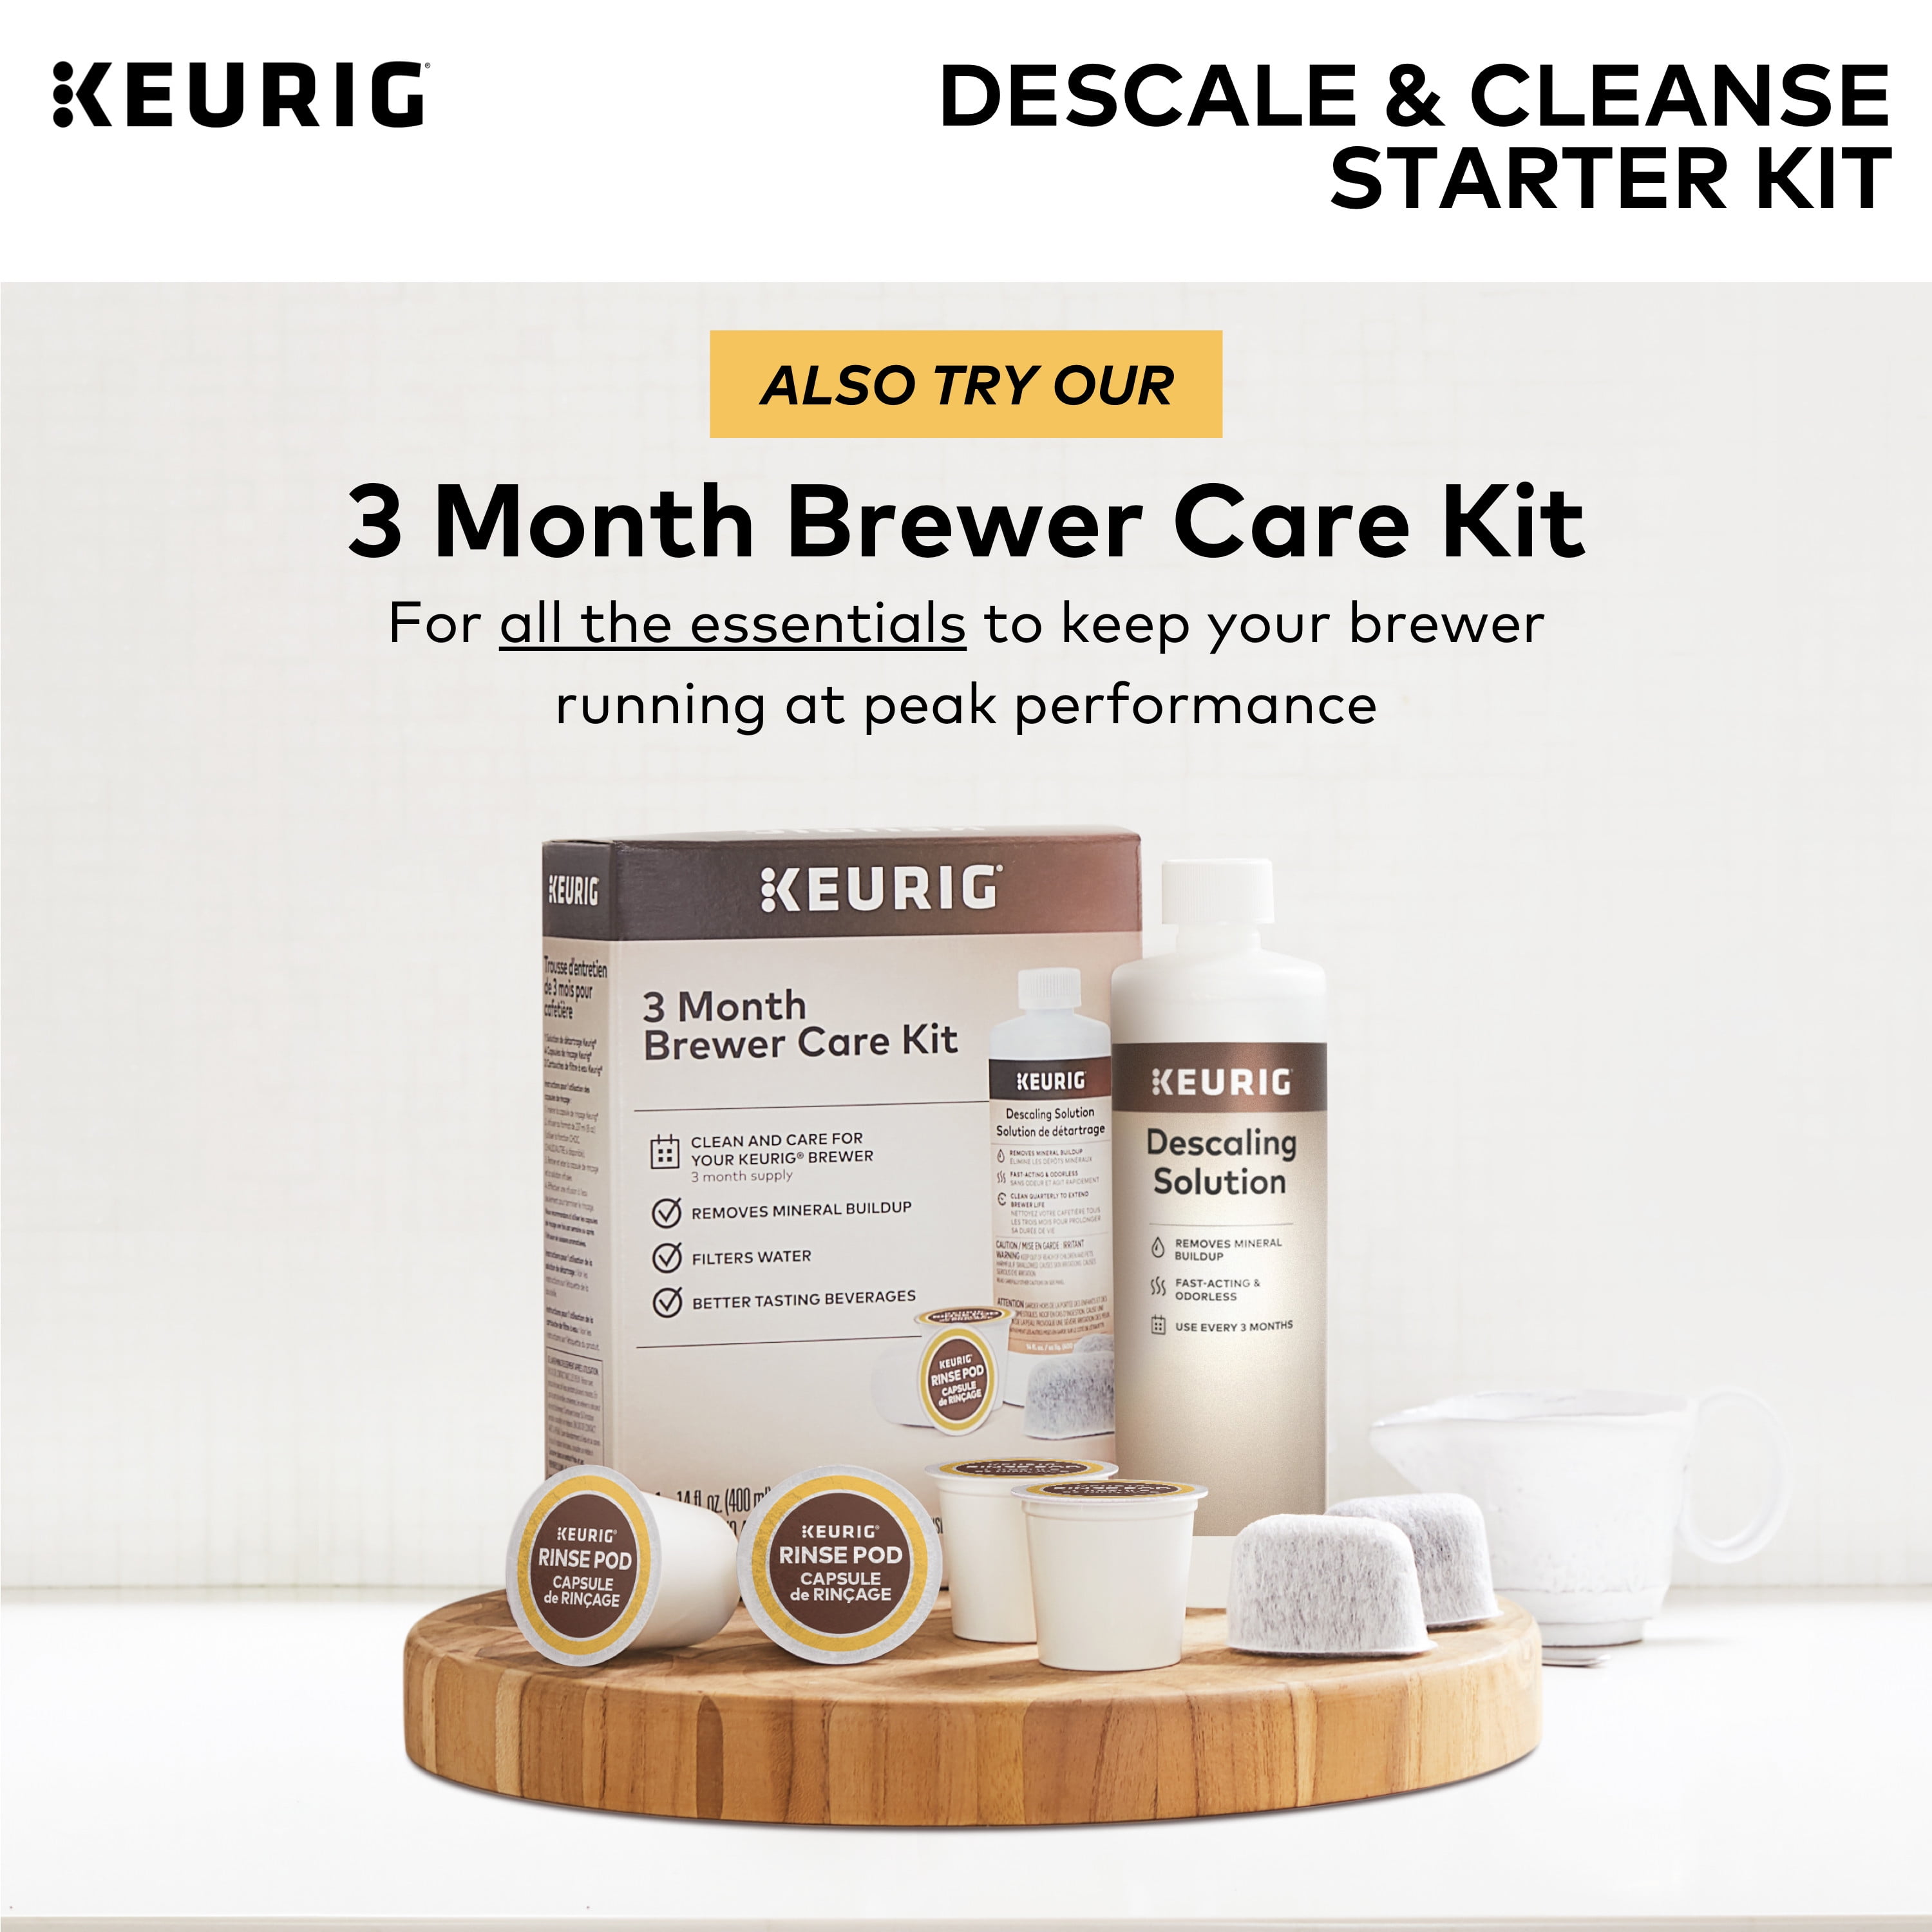 Descaling Kit 2 in 1 For Keurig 2.0 Brewers, XROM for Sale